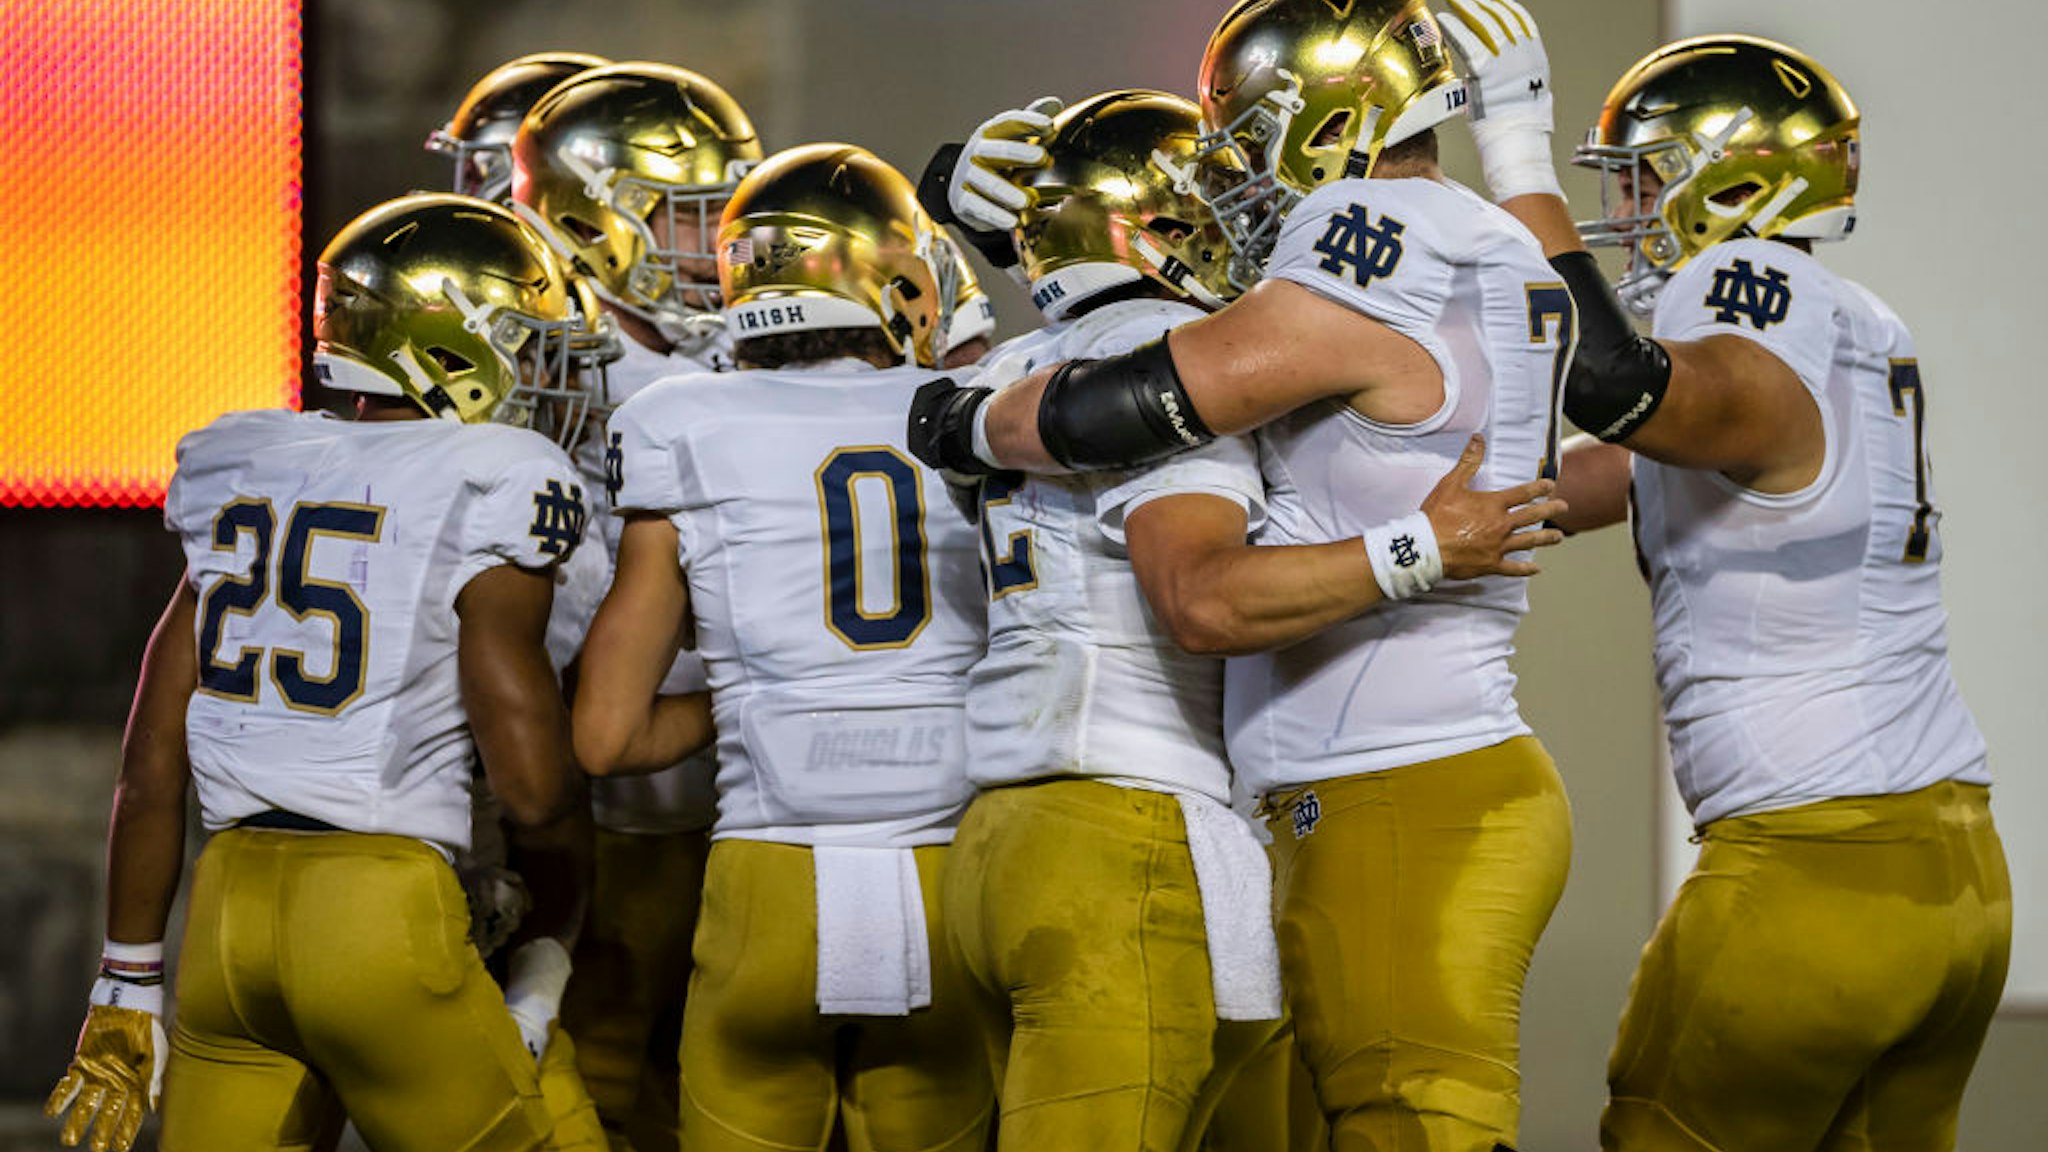 BLACKSBURG, VA - OCTOBER 09: Notre Dame Fighting Irish players celebrate after a touchdown against the Virginia Tech Hokies during the first half of the game at Lane Stadium on October 9, 2021 in Blacksburg, Virginia. (Photo by Scott Taetsch/Getty Images)